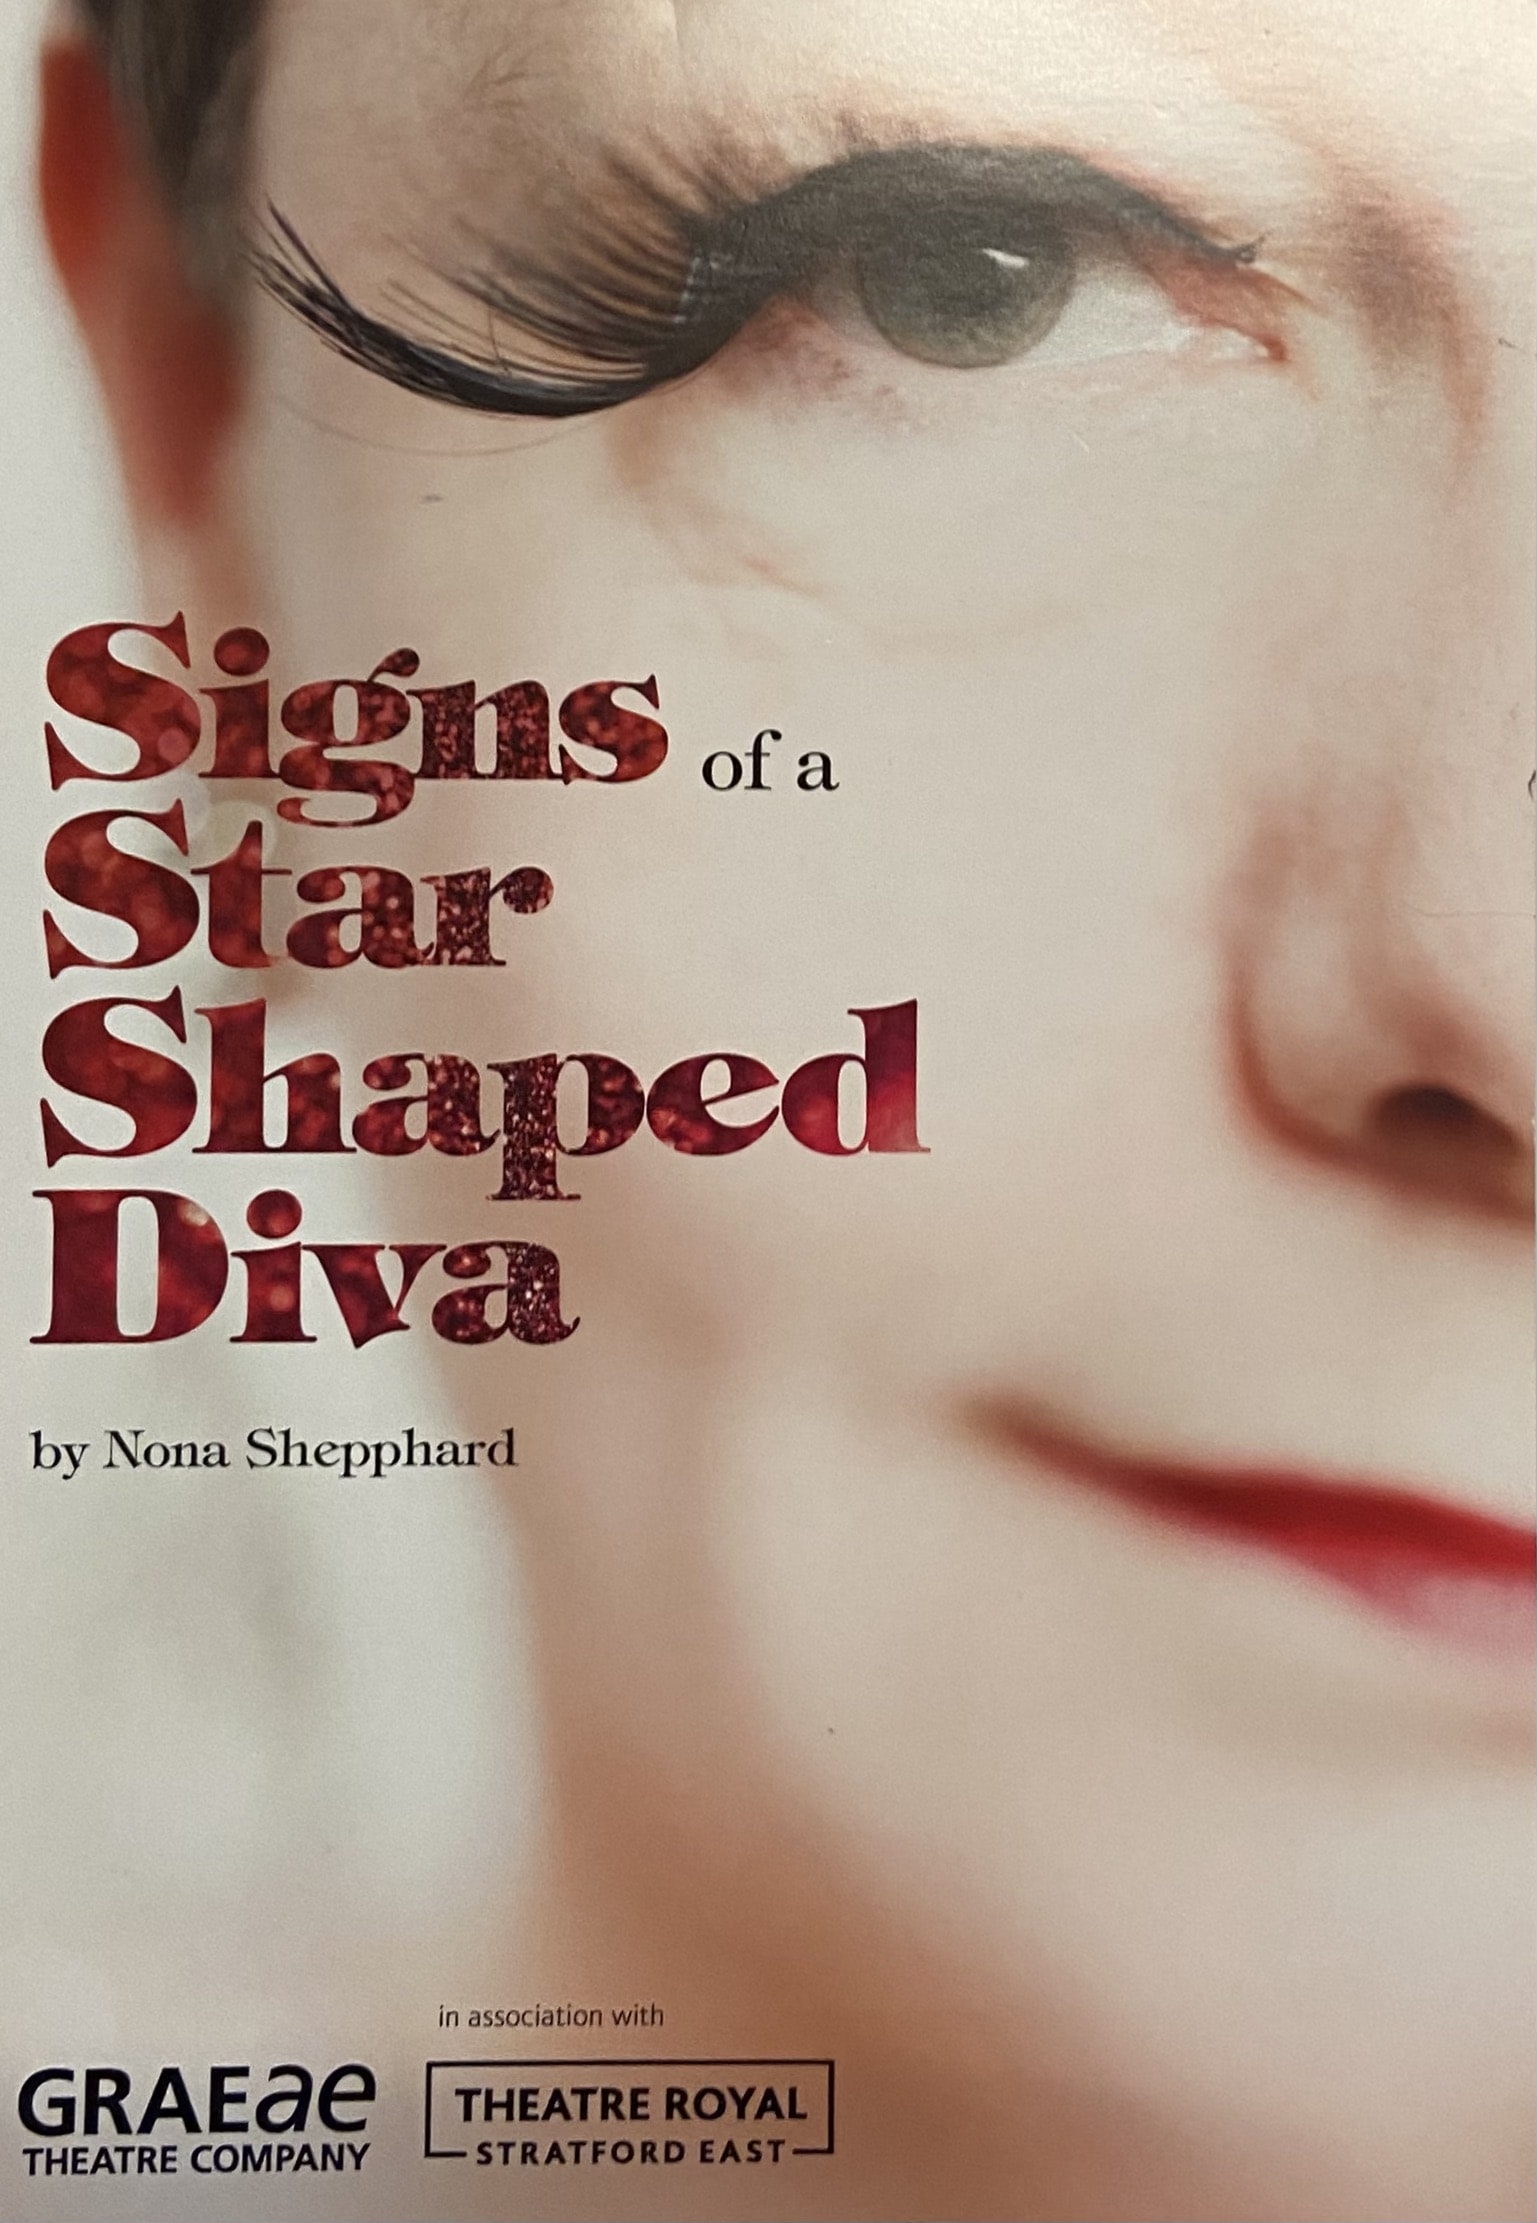 Poster for Graeae's production of 'Signs of a Star Shaped Diva', by Nona Shepphard. The poster is a close up of a white woman's face, wearing red lipstick, black eyeliner and a large false lash. The title of the play is written in red sparkly font.